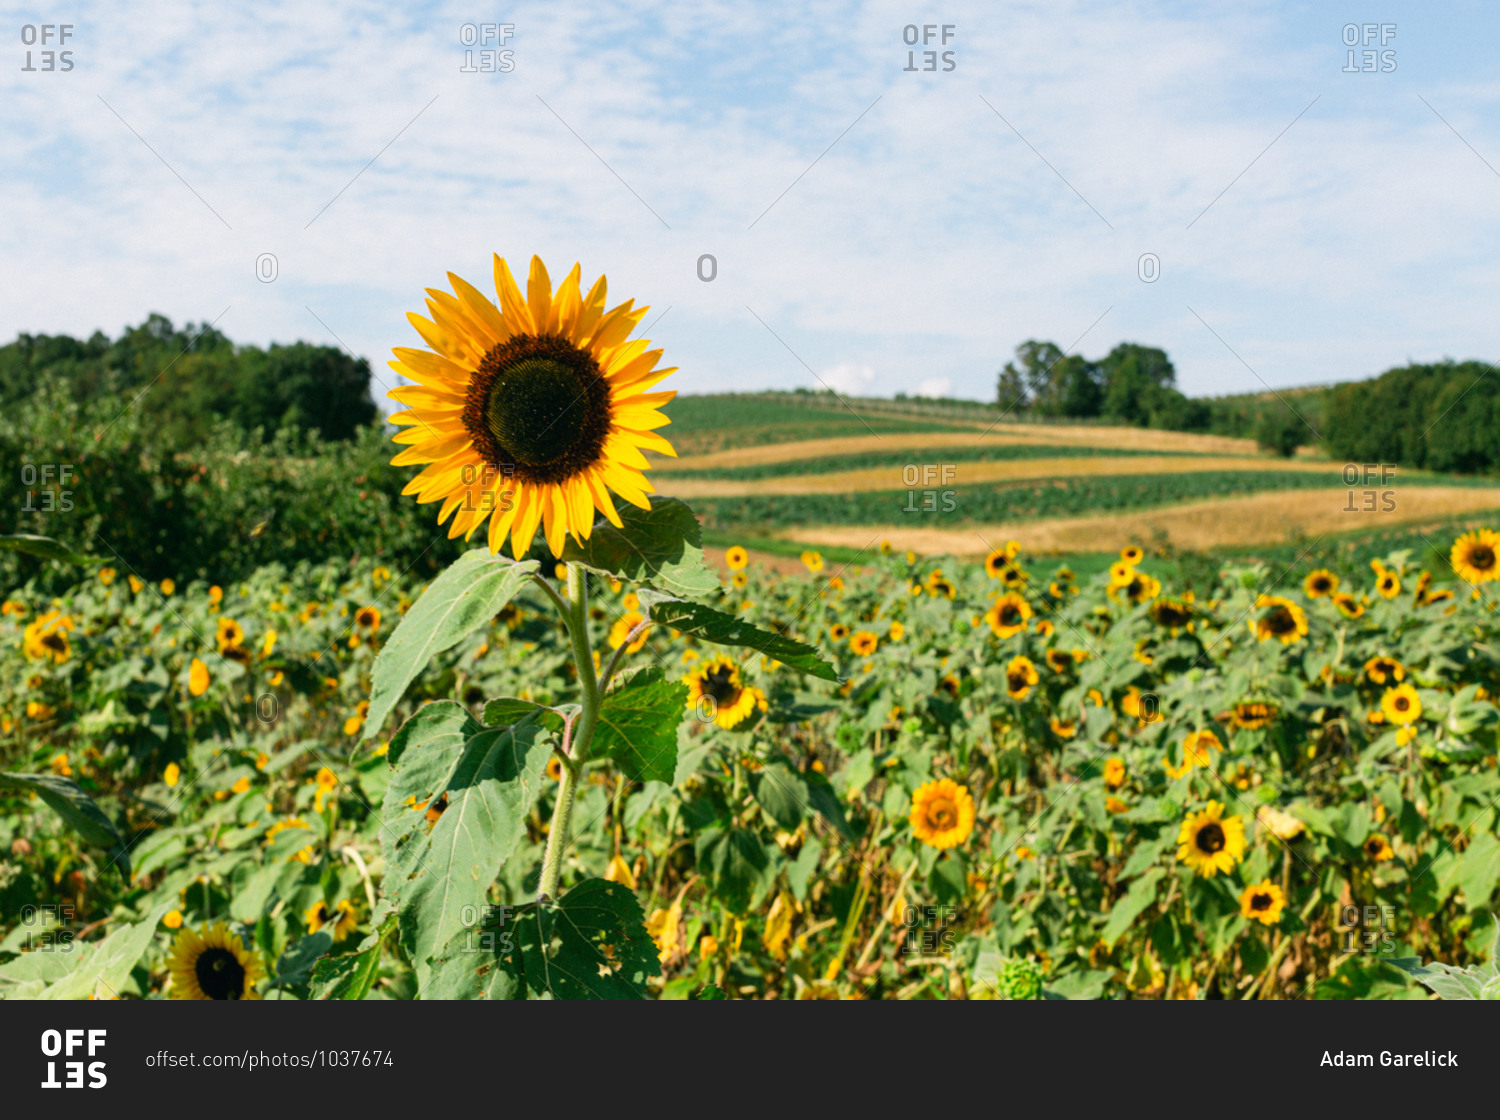 Bright yellow sunflowers in a field